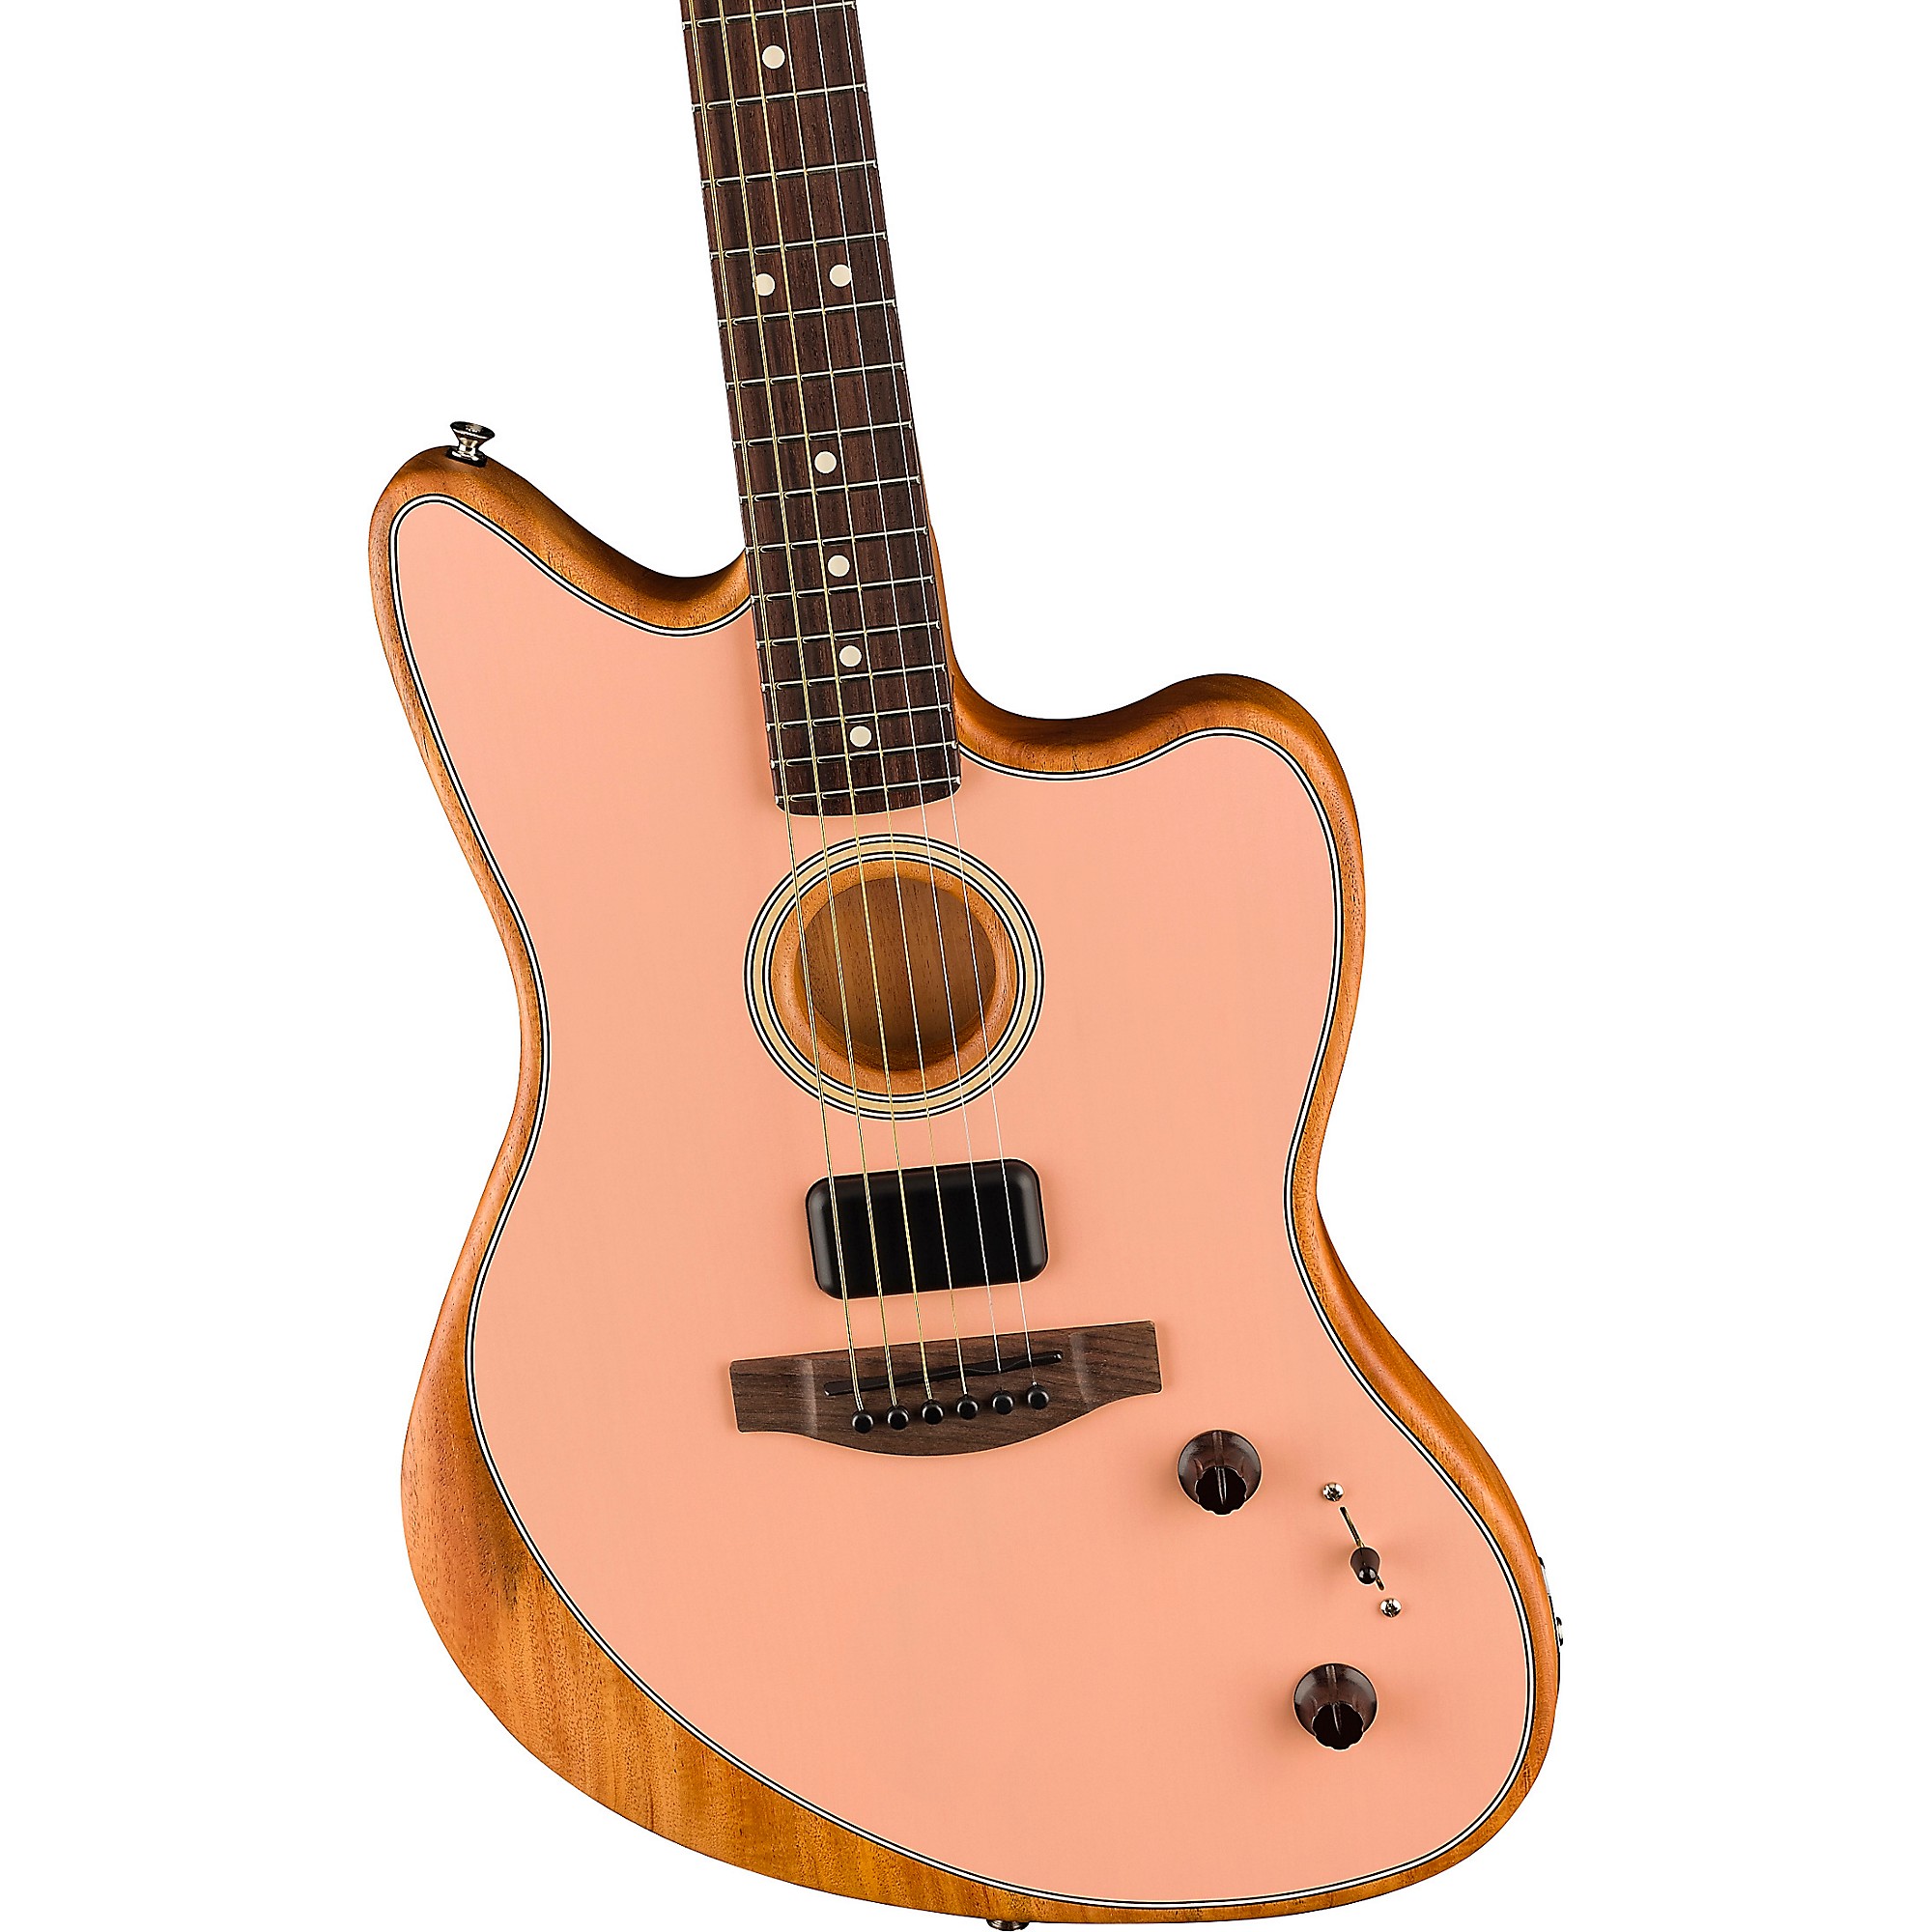 Guitar　Spruce-Mahogany　Fender　Player　Sitka　Pink　Shell　Acoustasonic　Guitar　Acoustic-Electric　Jazzmaster　Center